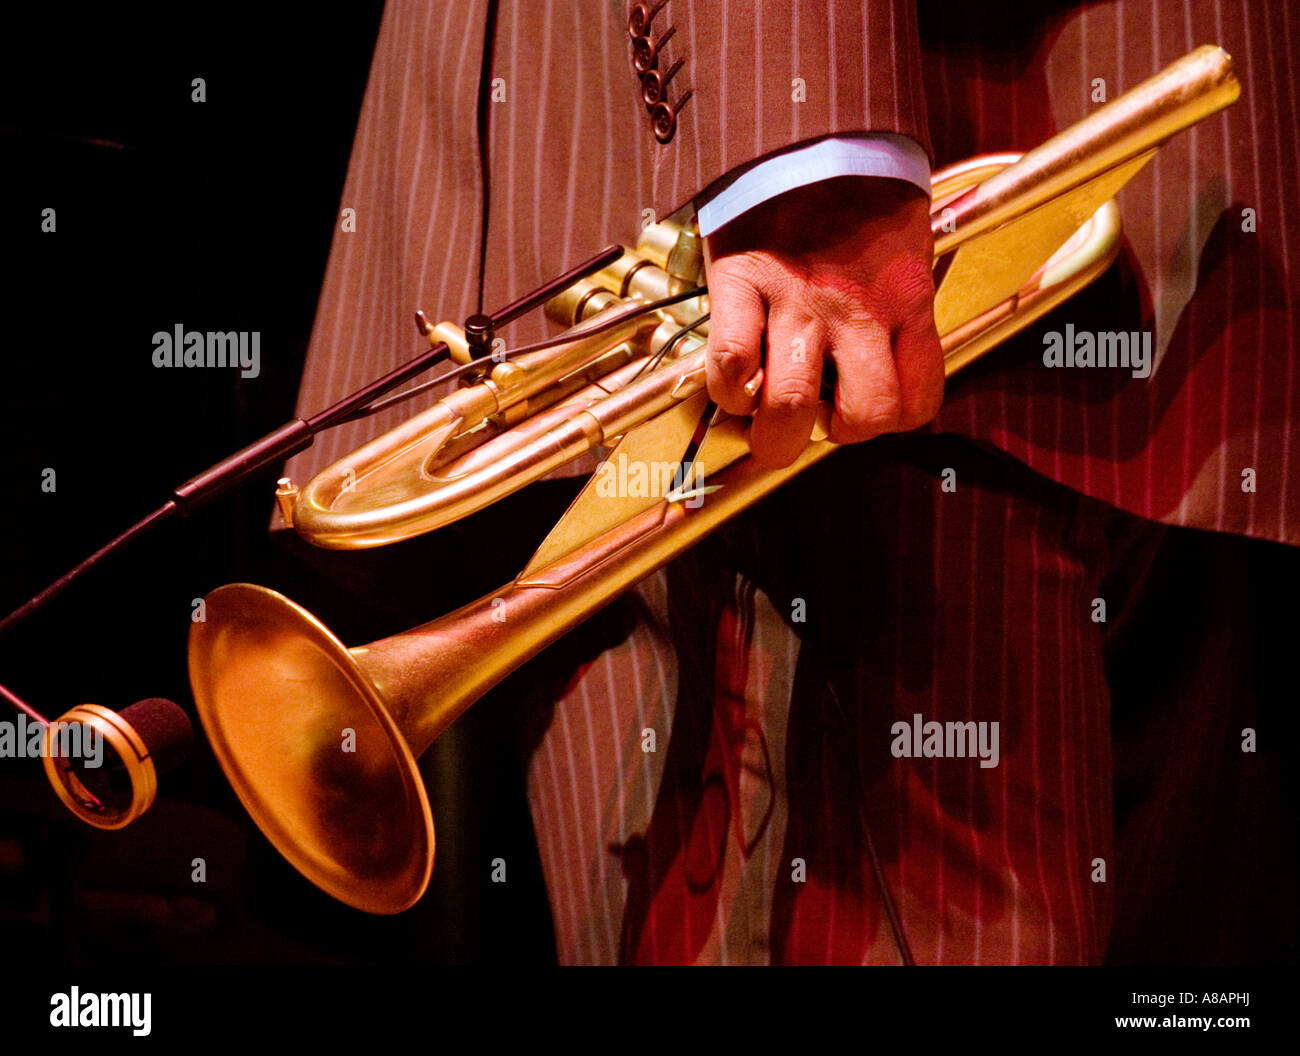 TRUMPET player TERENCE BLANCHARD performs at the NEW GENERATION JAZZ FESTIVAL MONTEREY CALIFORNIA Stock Photo